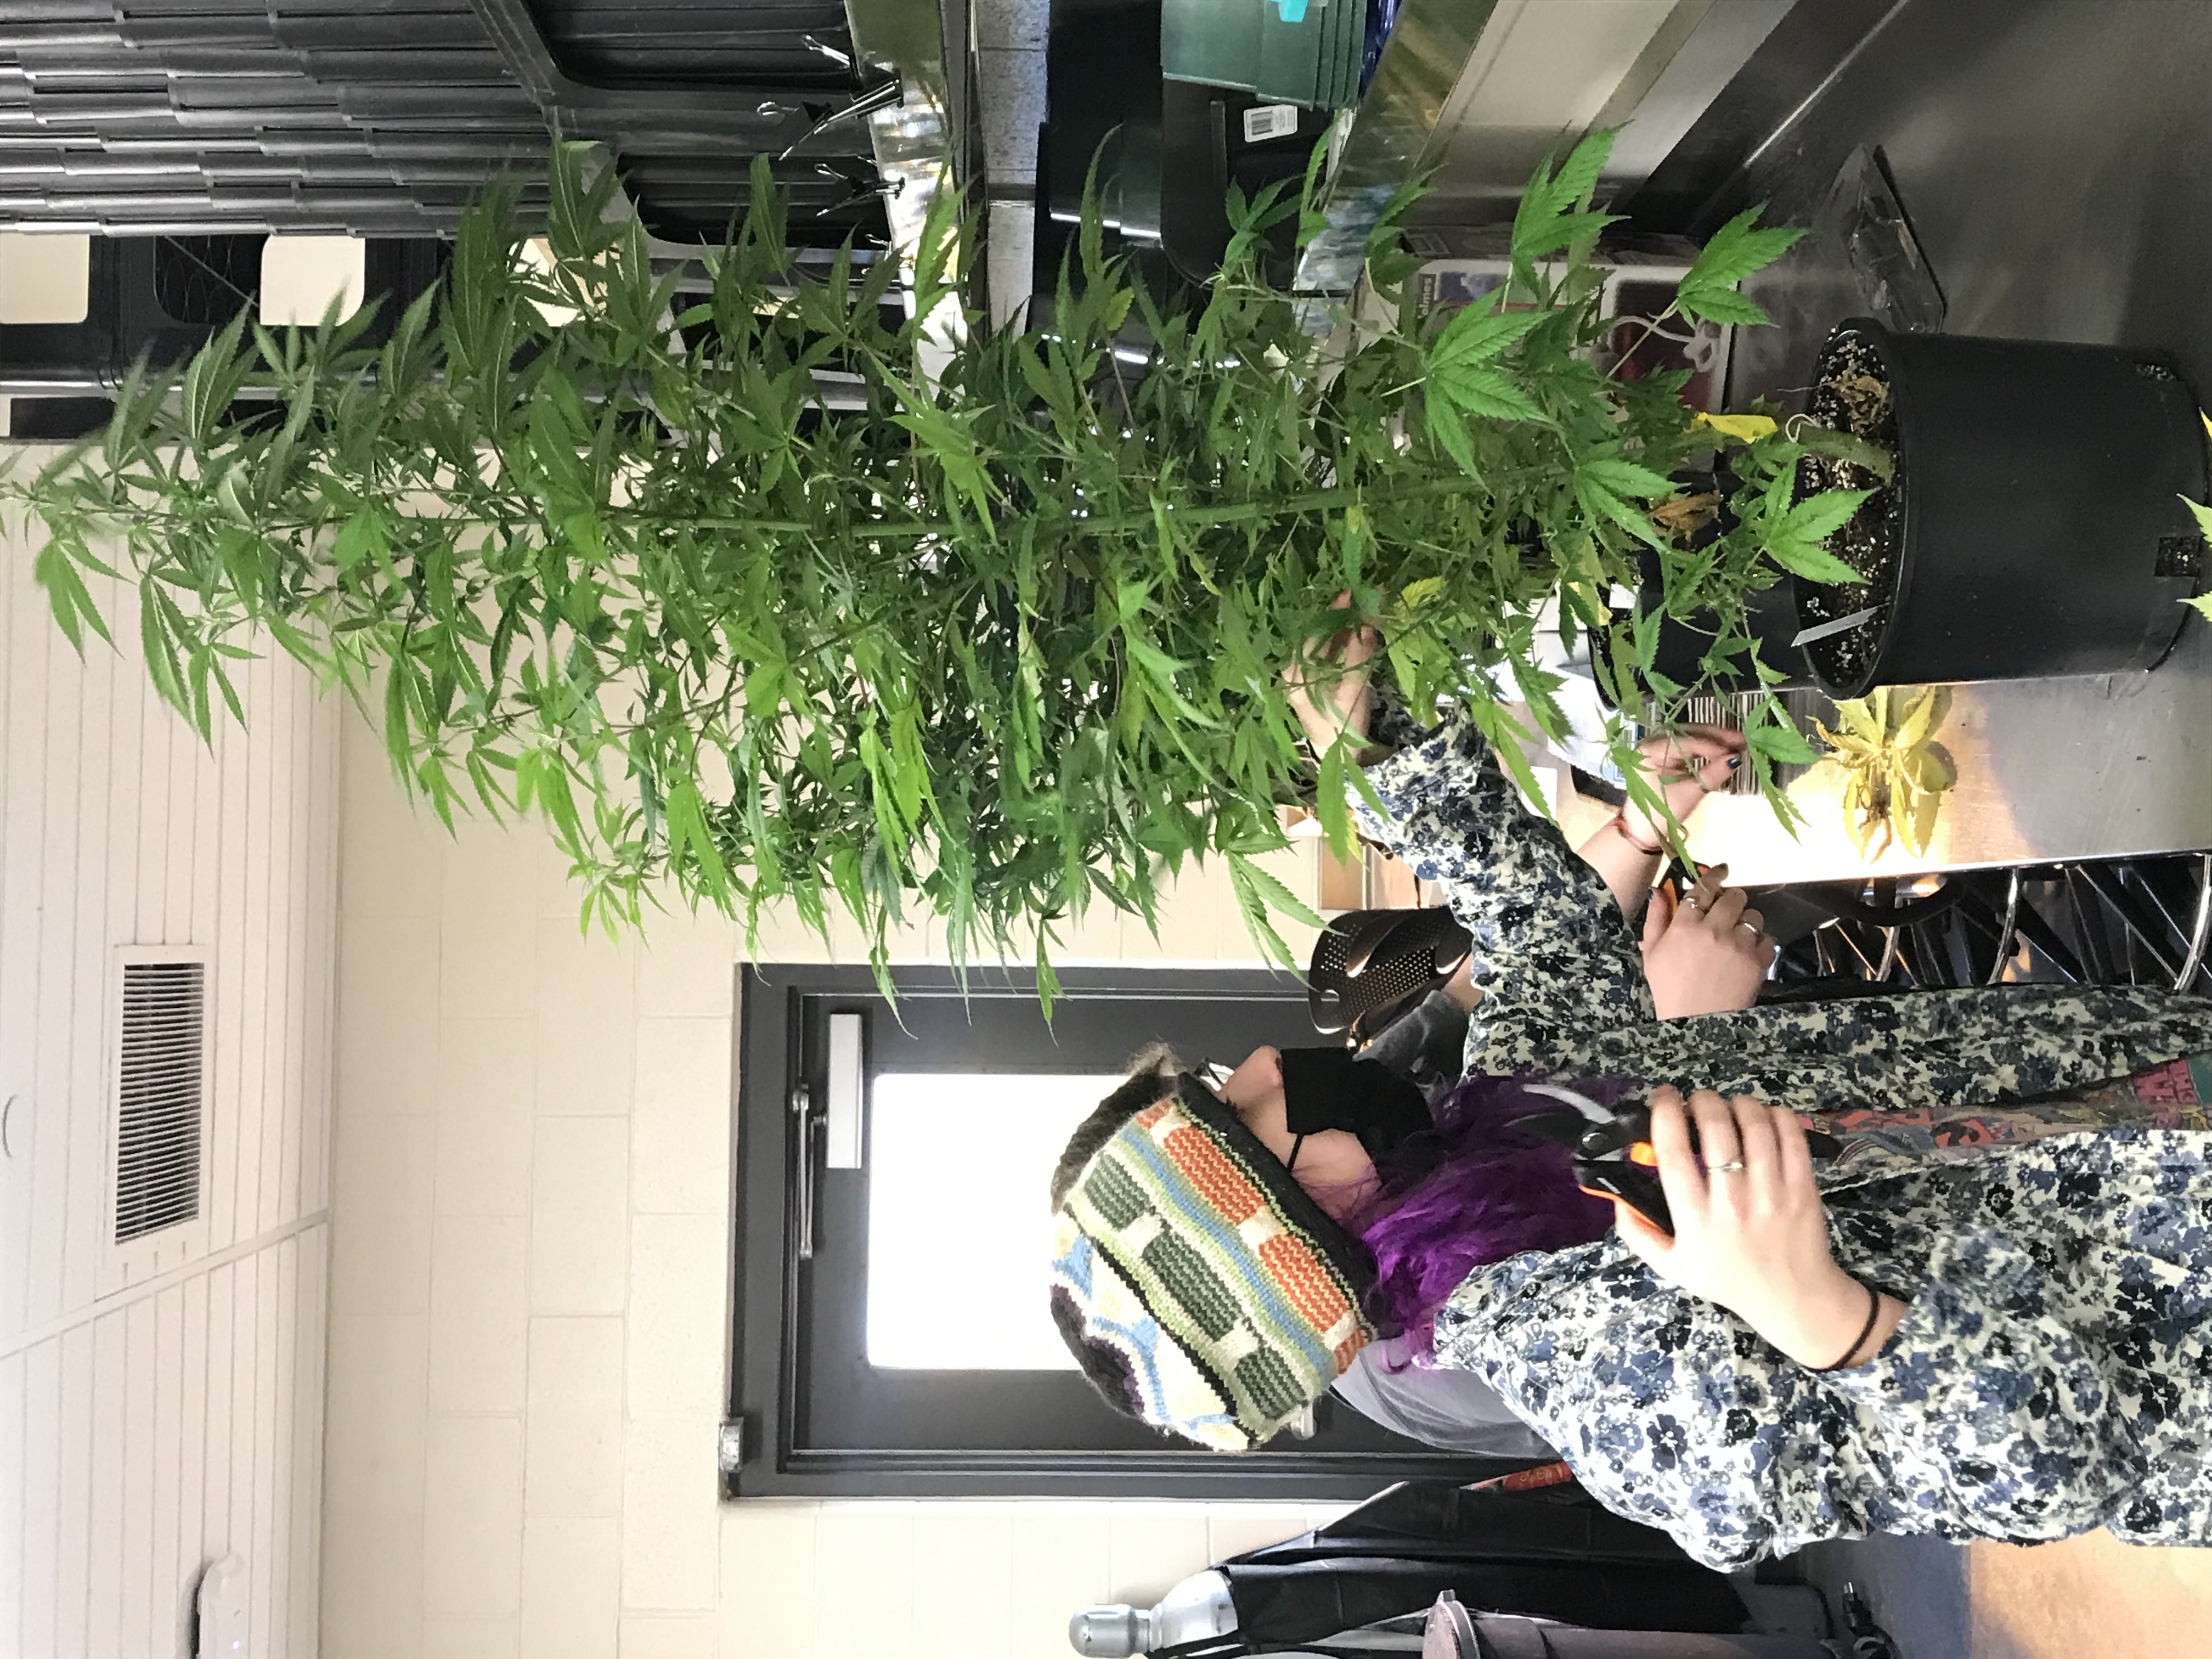 Eastern students working with cannabis plants